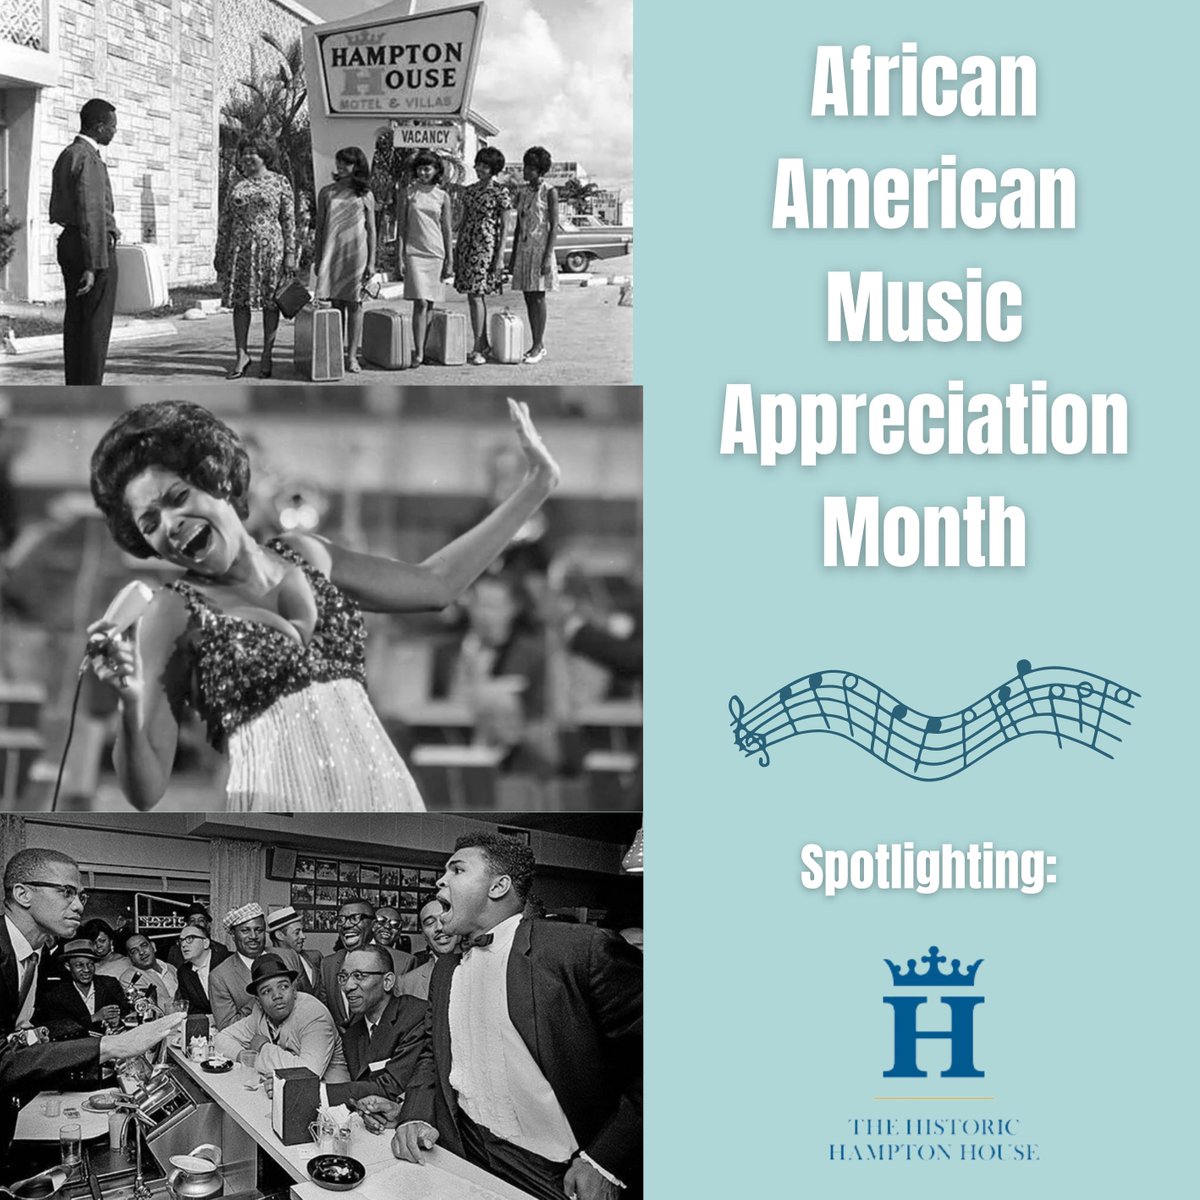 June is #AfricanAmericanMusicAppreciationMonth!🎵 This month celebrates black musical influences that have become essential to our nation’s cultural heritage & we're spotlighting Miami's iconic Historic Hampton House! For more details, please visit: historichamptonhouse.org